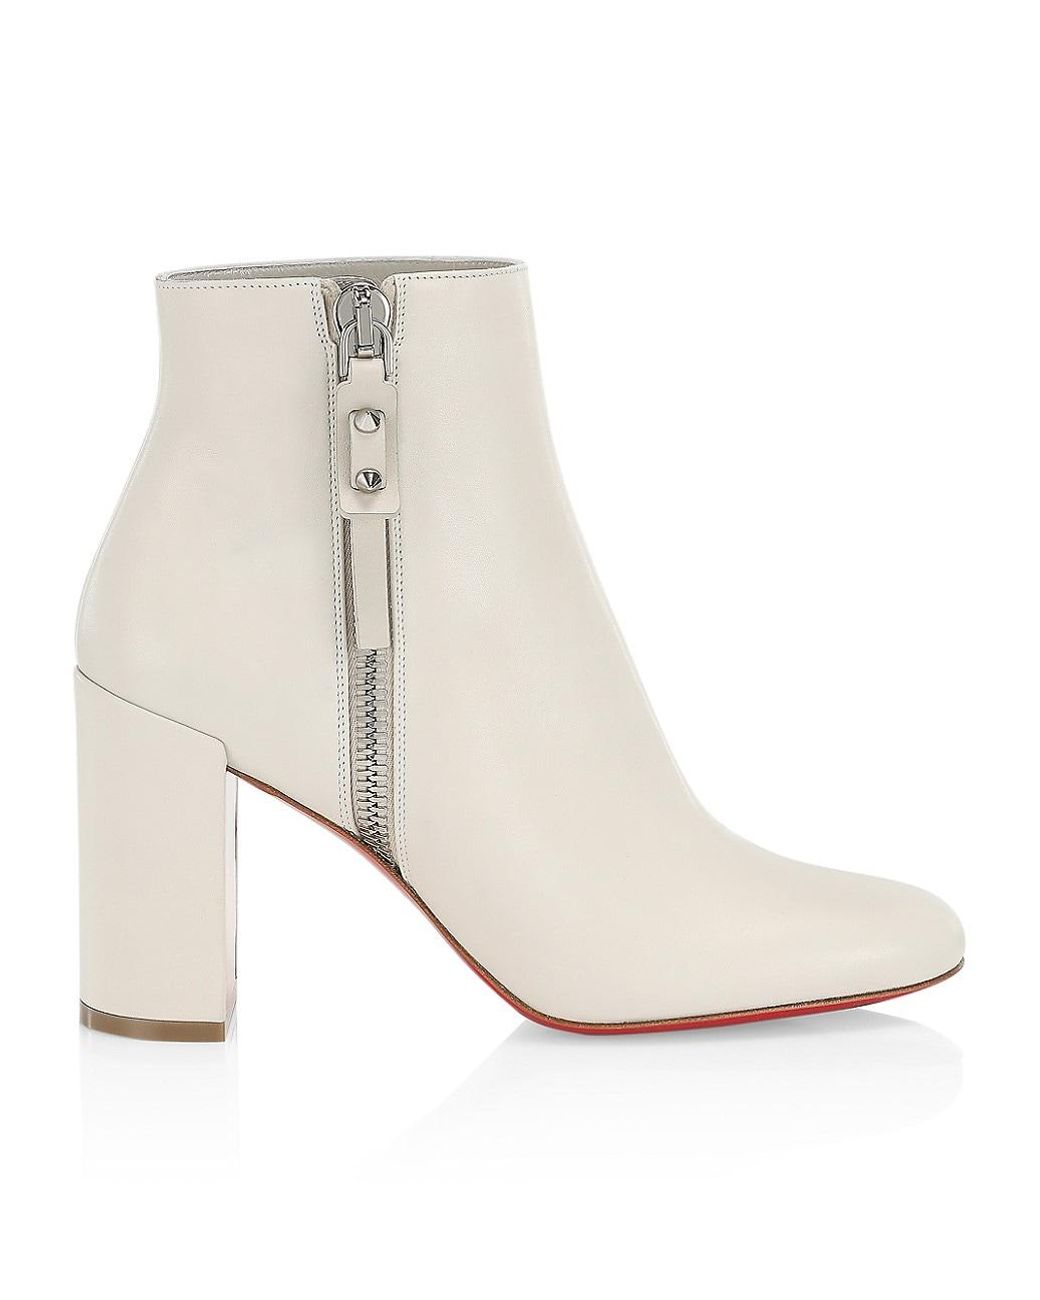 Christian Louboutin Ziptotal Leather Booties in White | Lyst